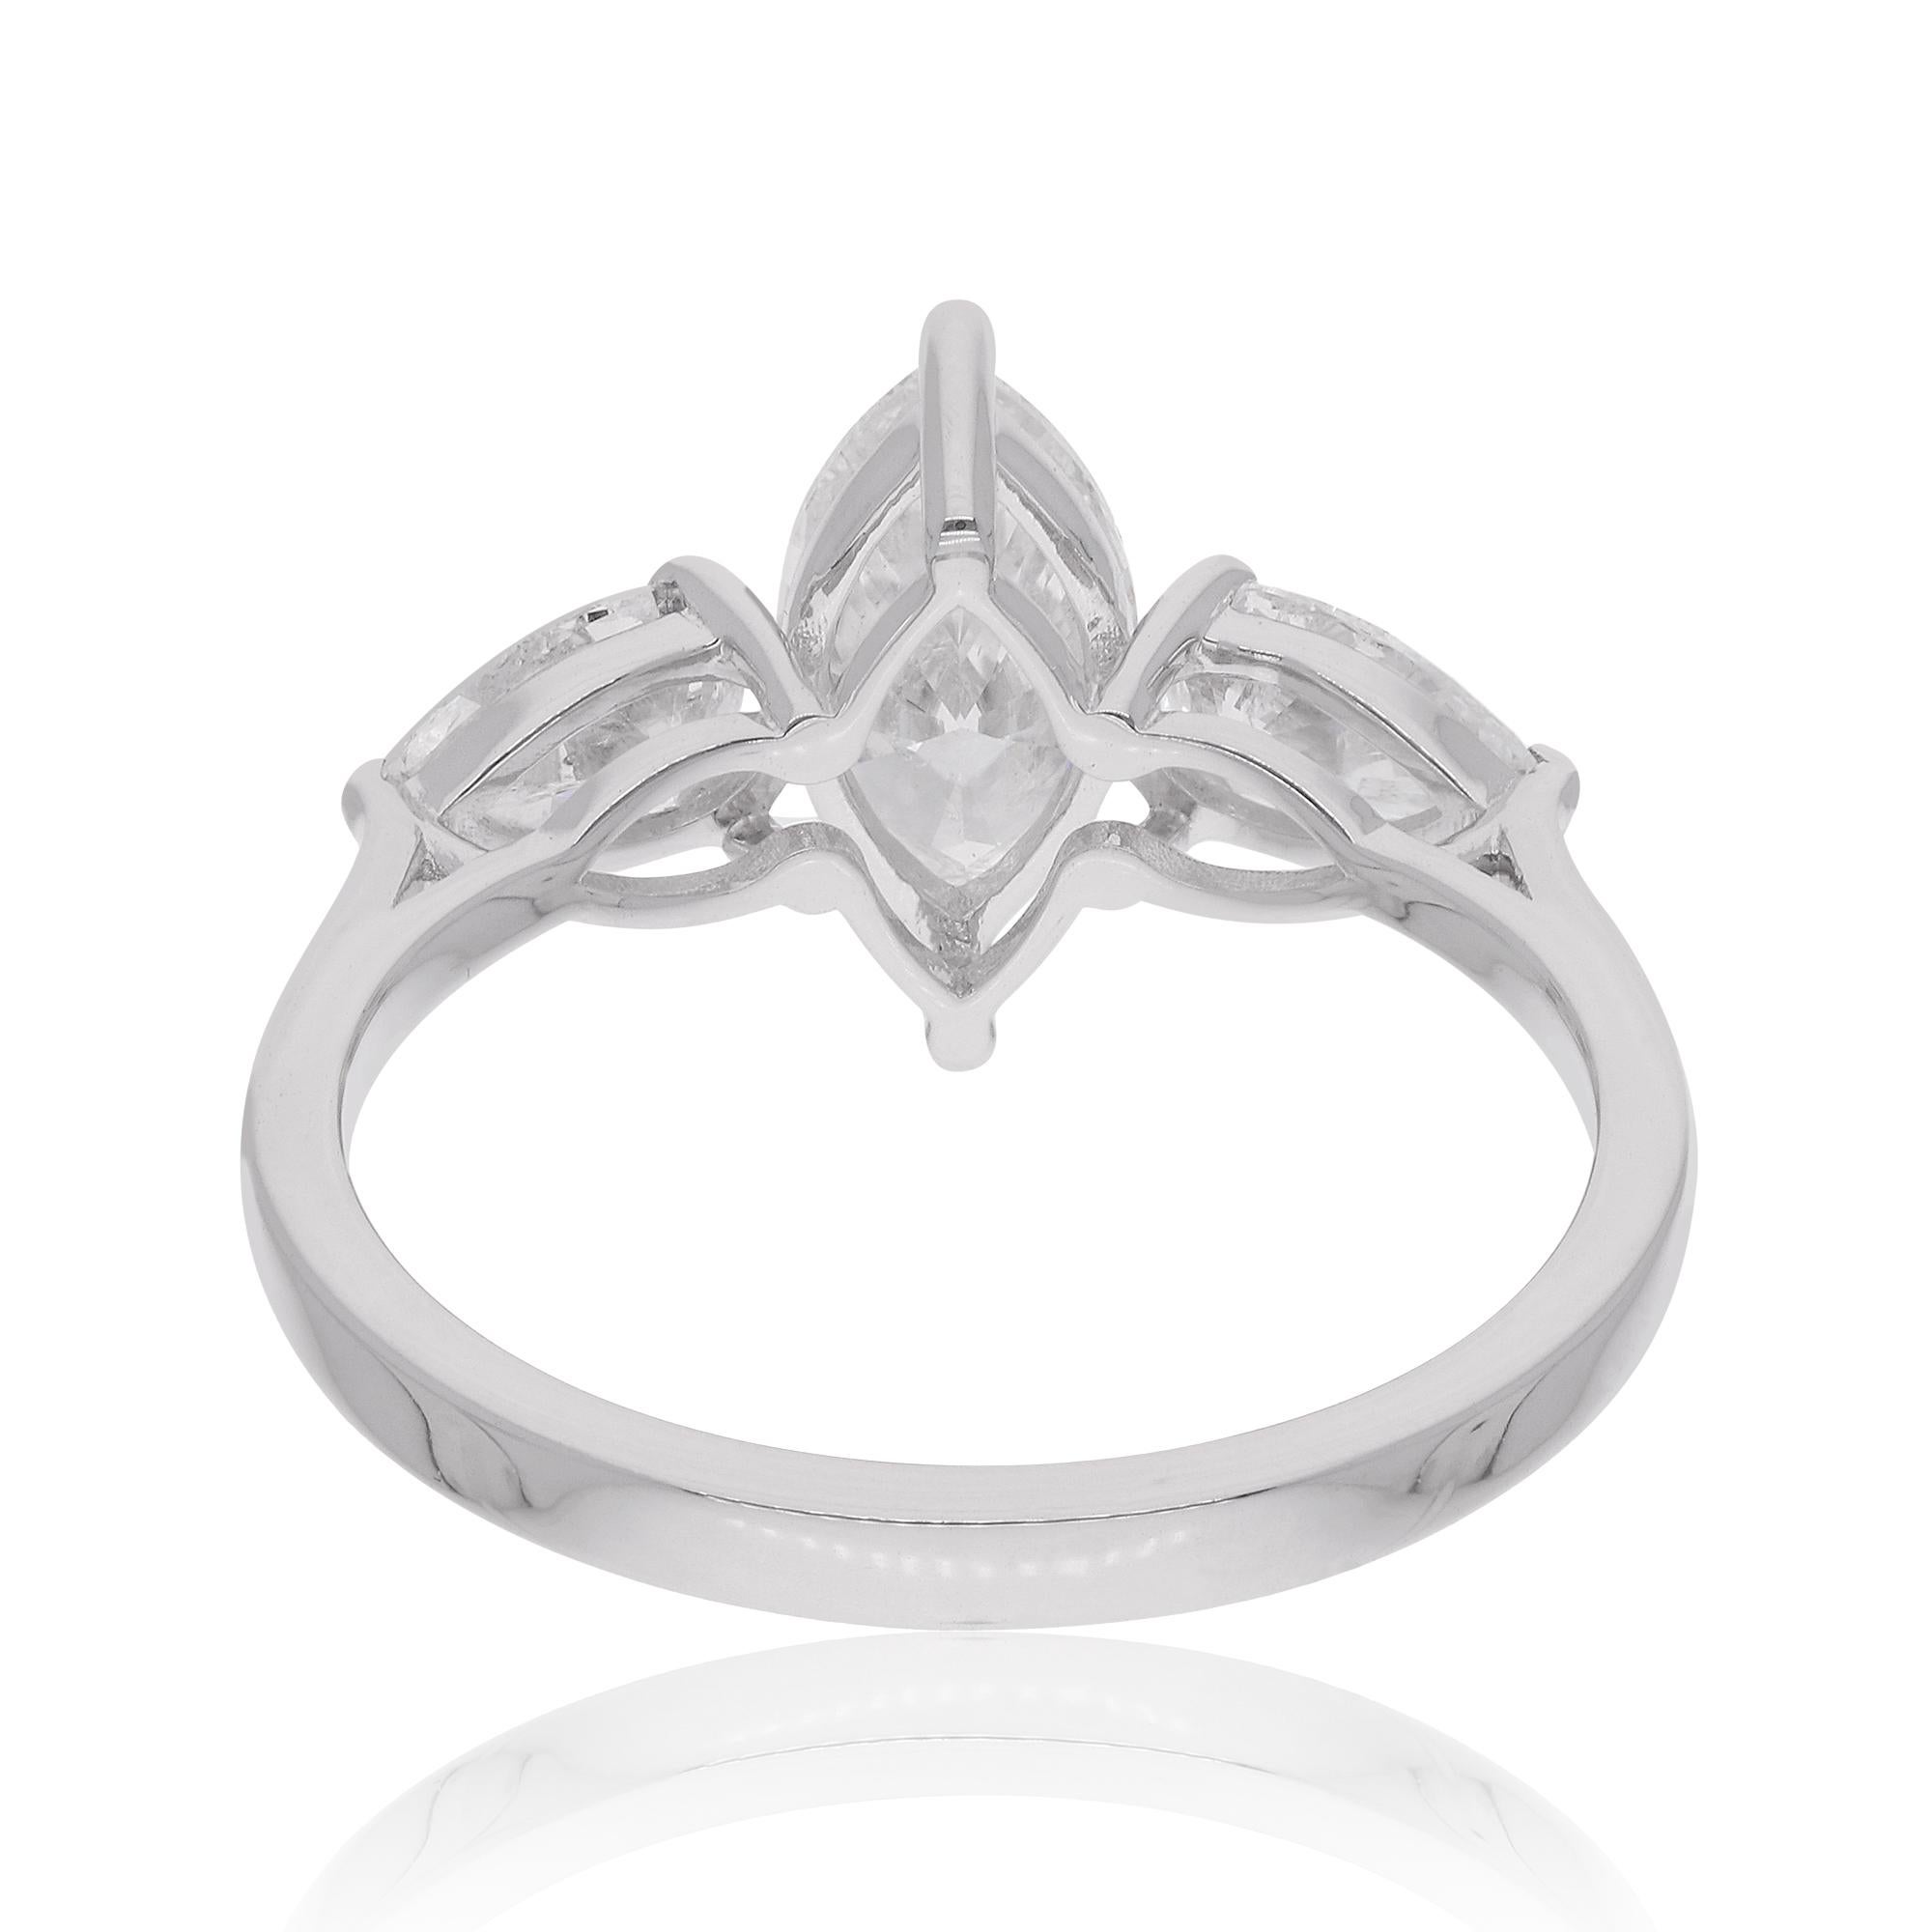 The ring can serve as a symbol of a promise or commitment, such as a promise of love, friendship, or loyalty. It can be given for various occasions, including engagements, anniversaries, or other significant milestones.

Item Code :- SER-23779